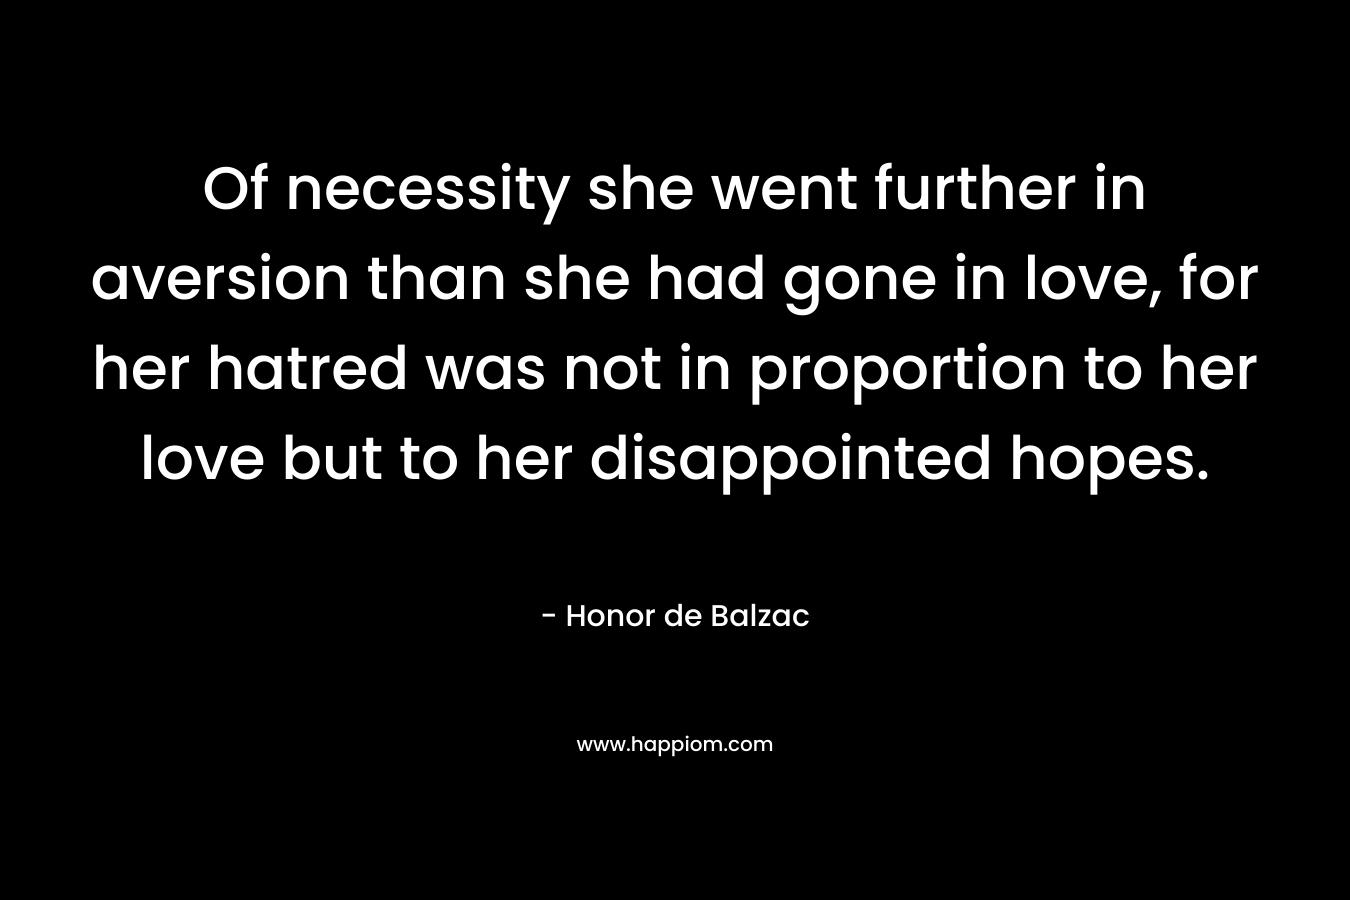 Of necessity she went further in aversion than she had gone in love, for her hatred was not in proportion to her love but to her disappointed hopes. – Honor de Balzac